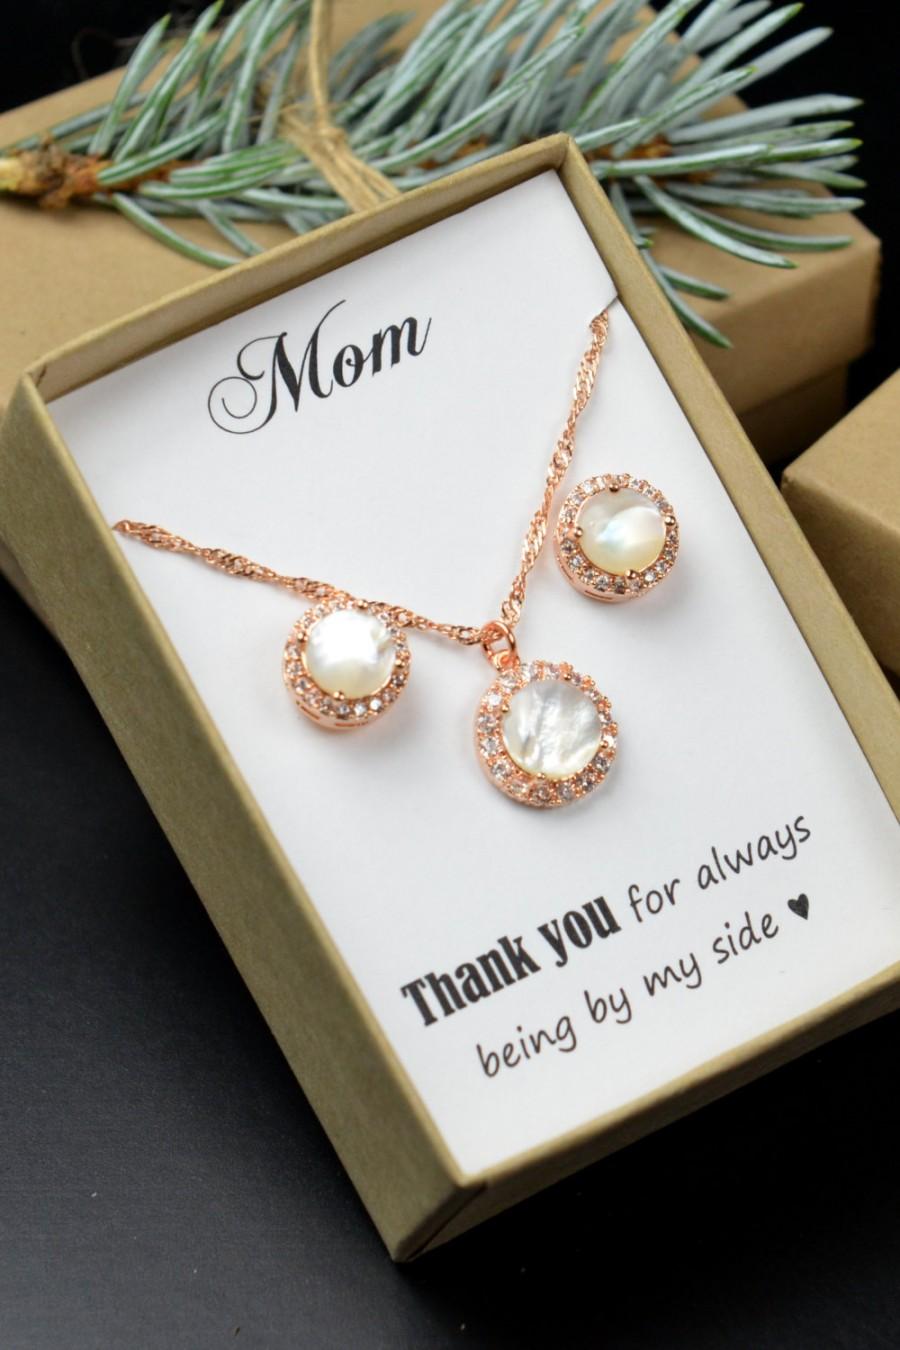 Wedding - Mother of the Bride Gift, Personalized Bridesmaids Gift, Mother of the Groom Gifts, Bridal Party Gift, Bridal Party Jewelry, Wedding